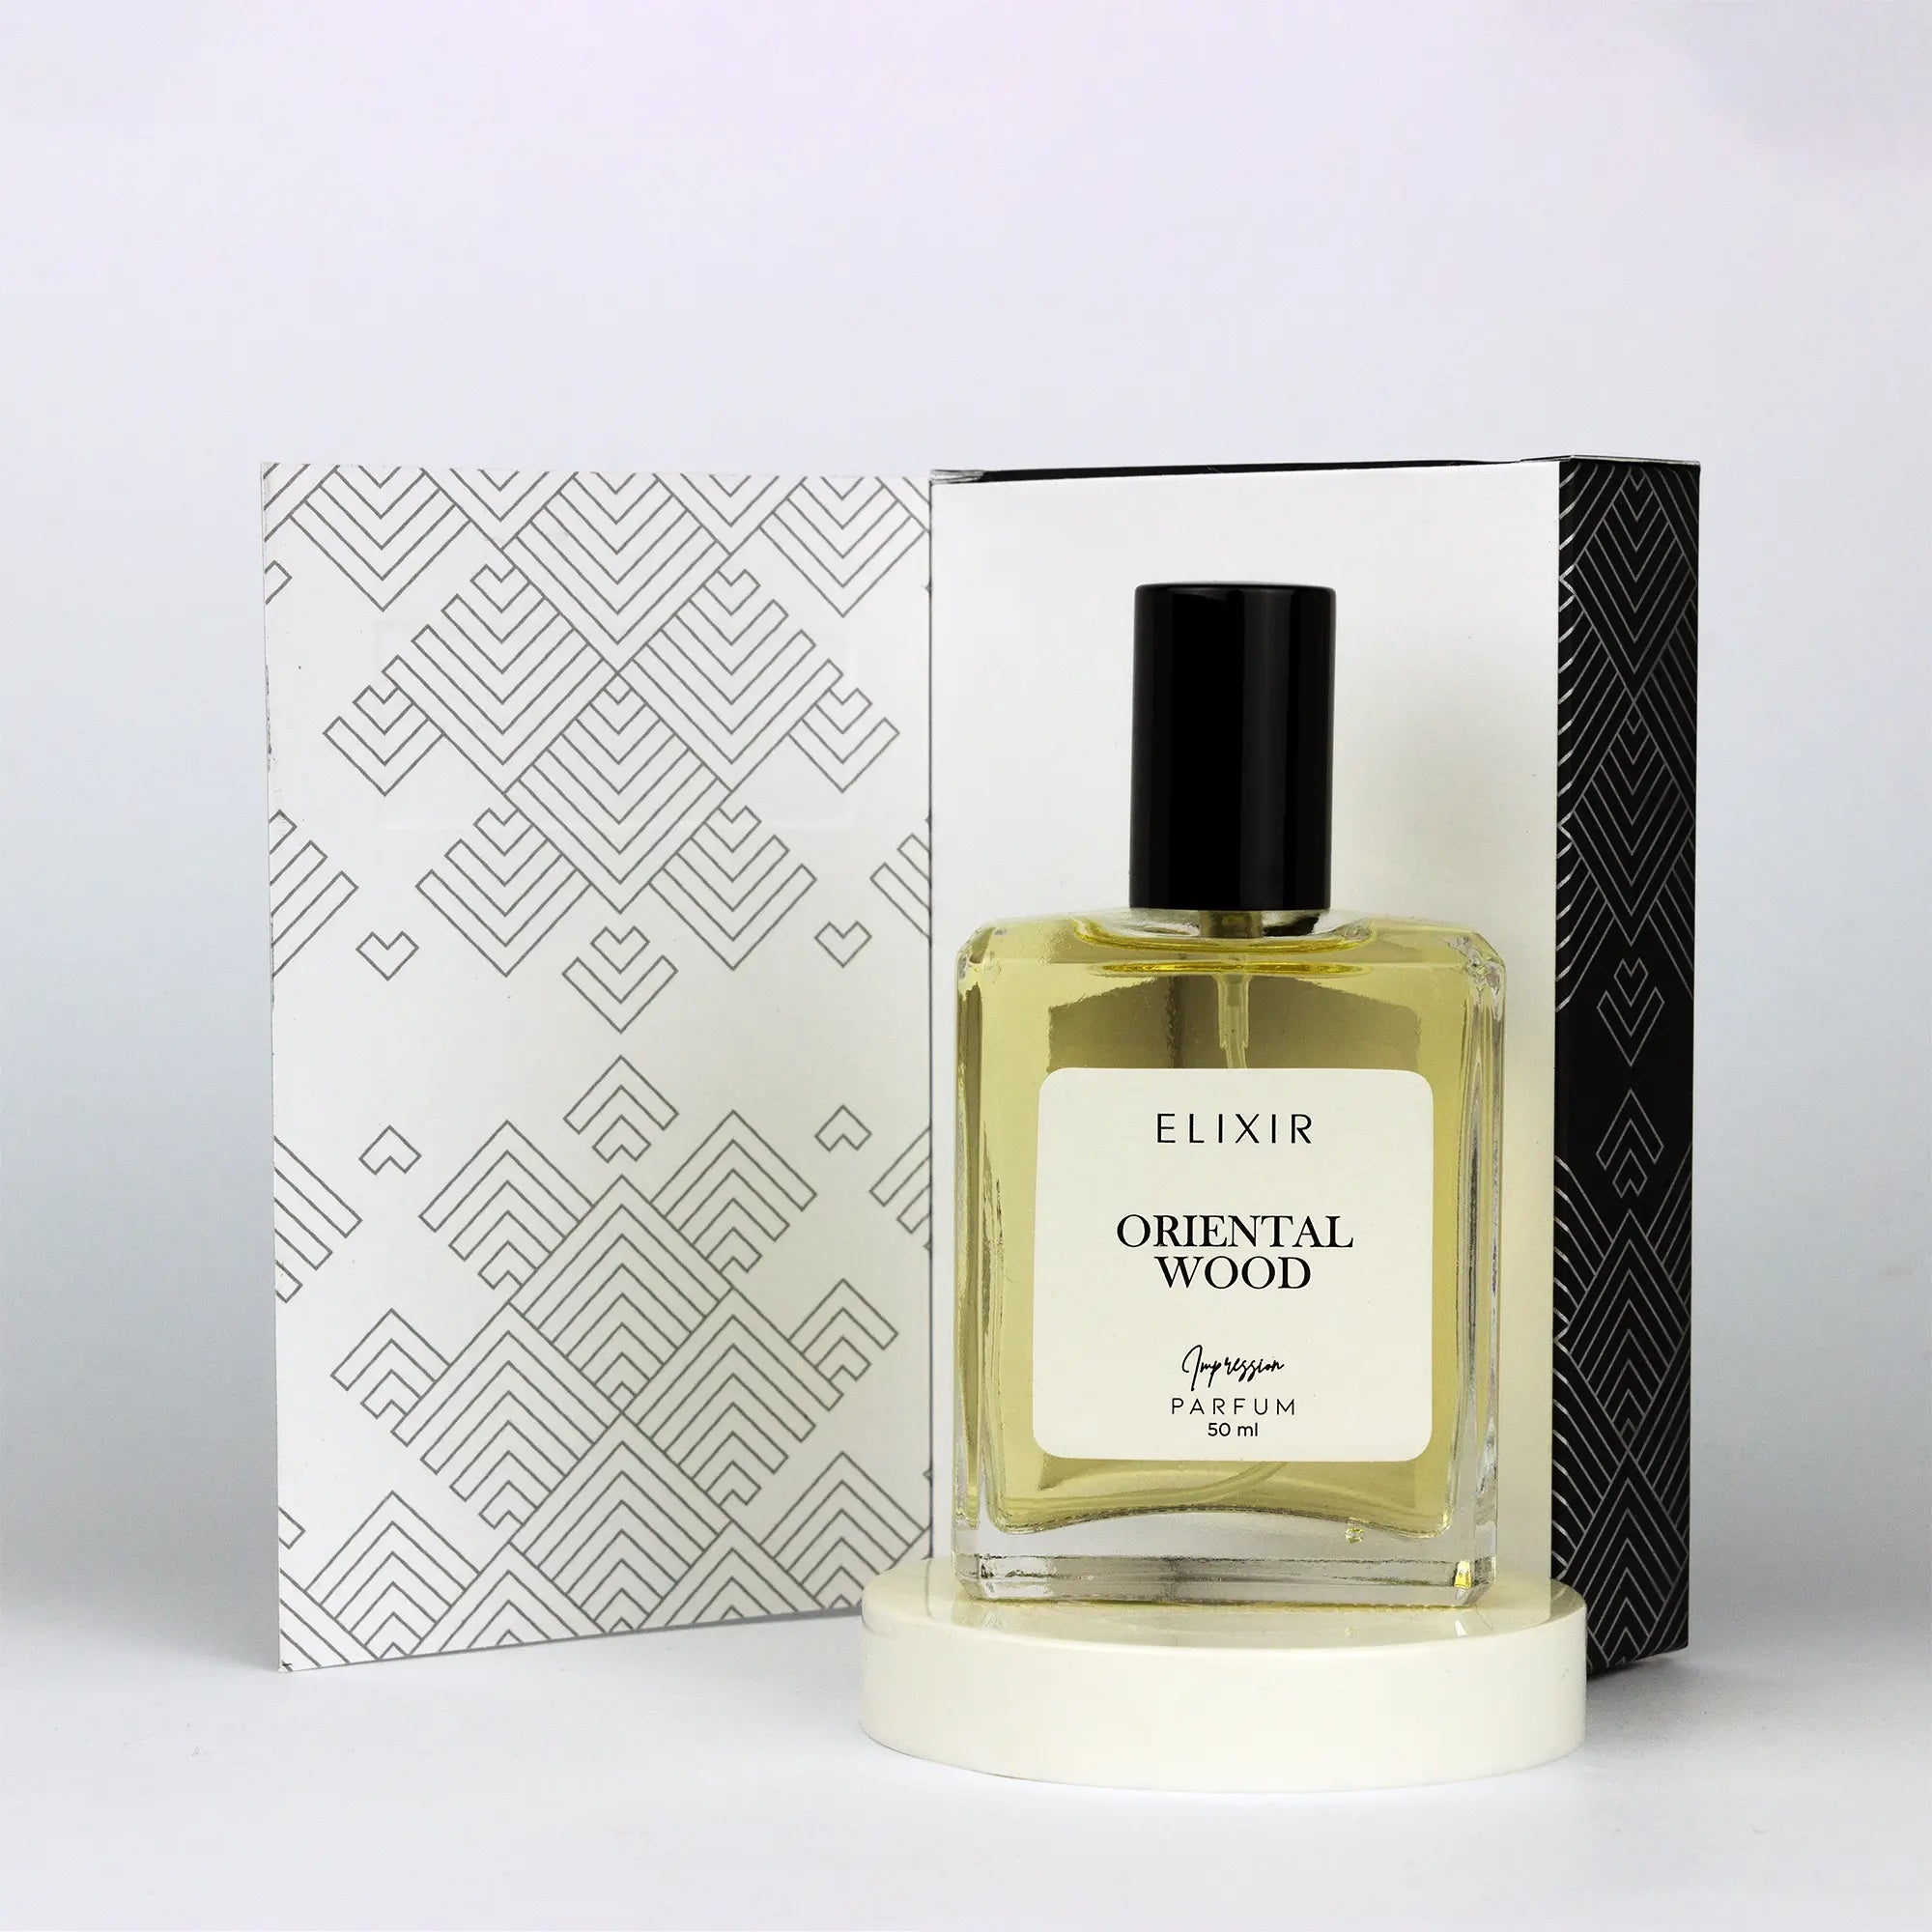 NEW to NE.Scent The Louis Vuitton inspired NOUVEAU MONDE Very Very